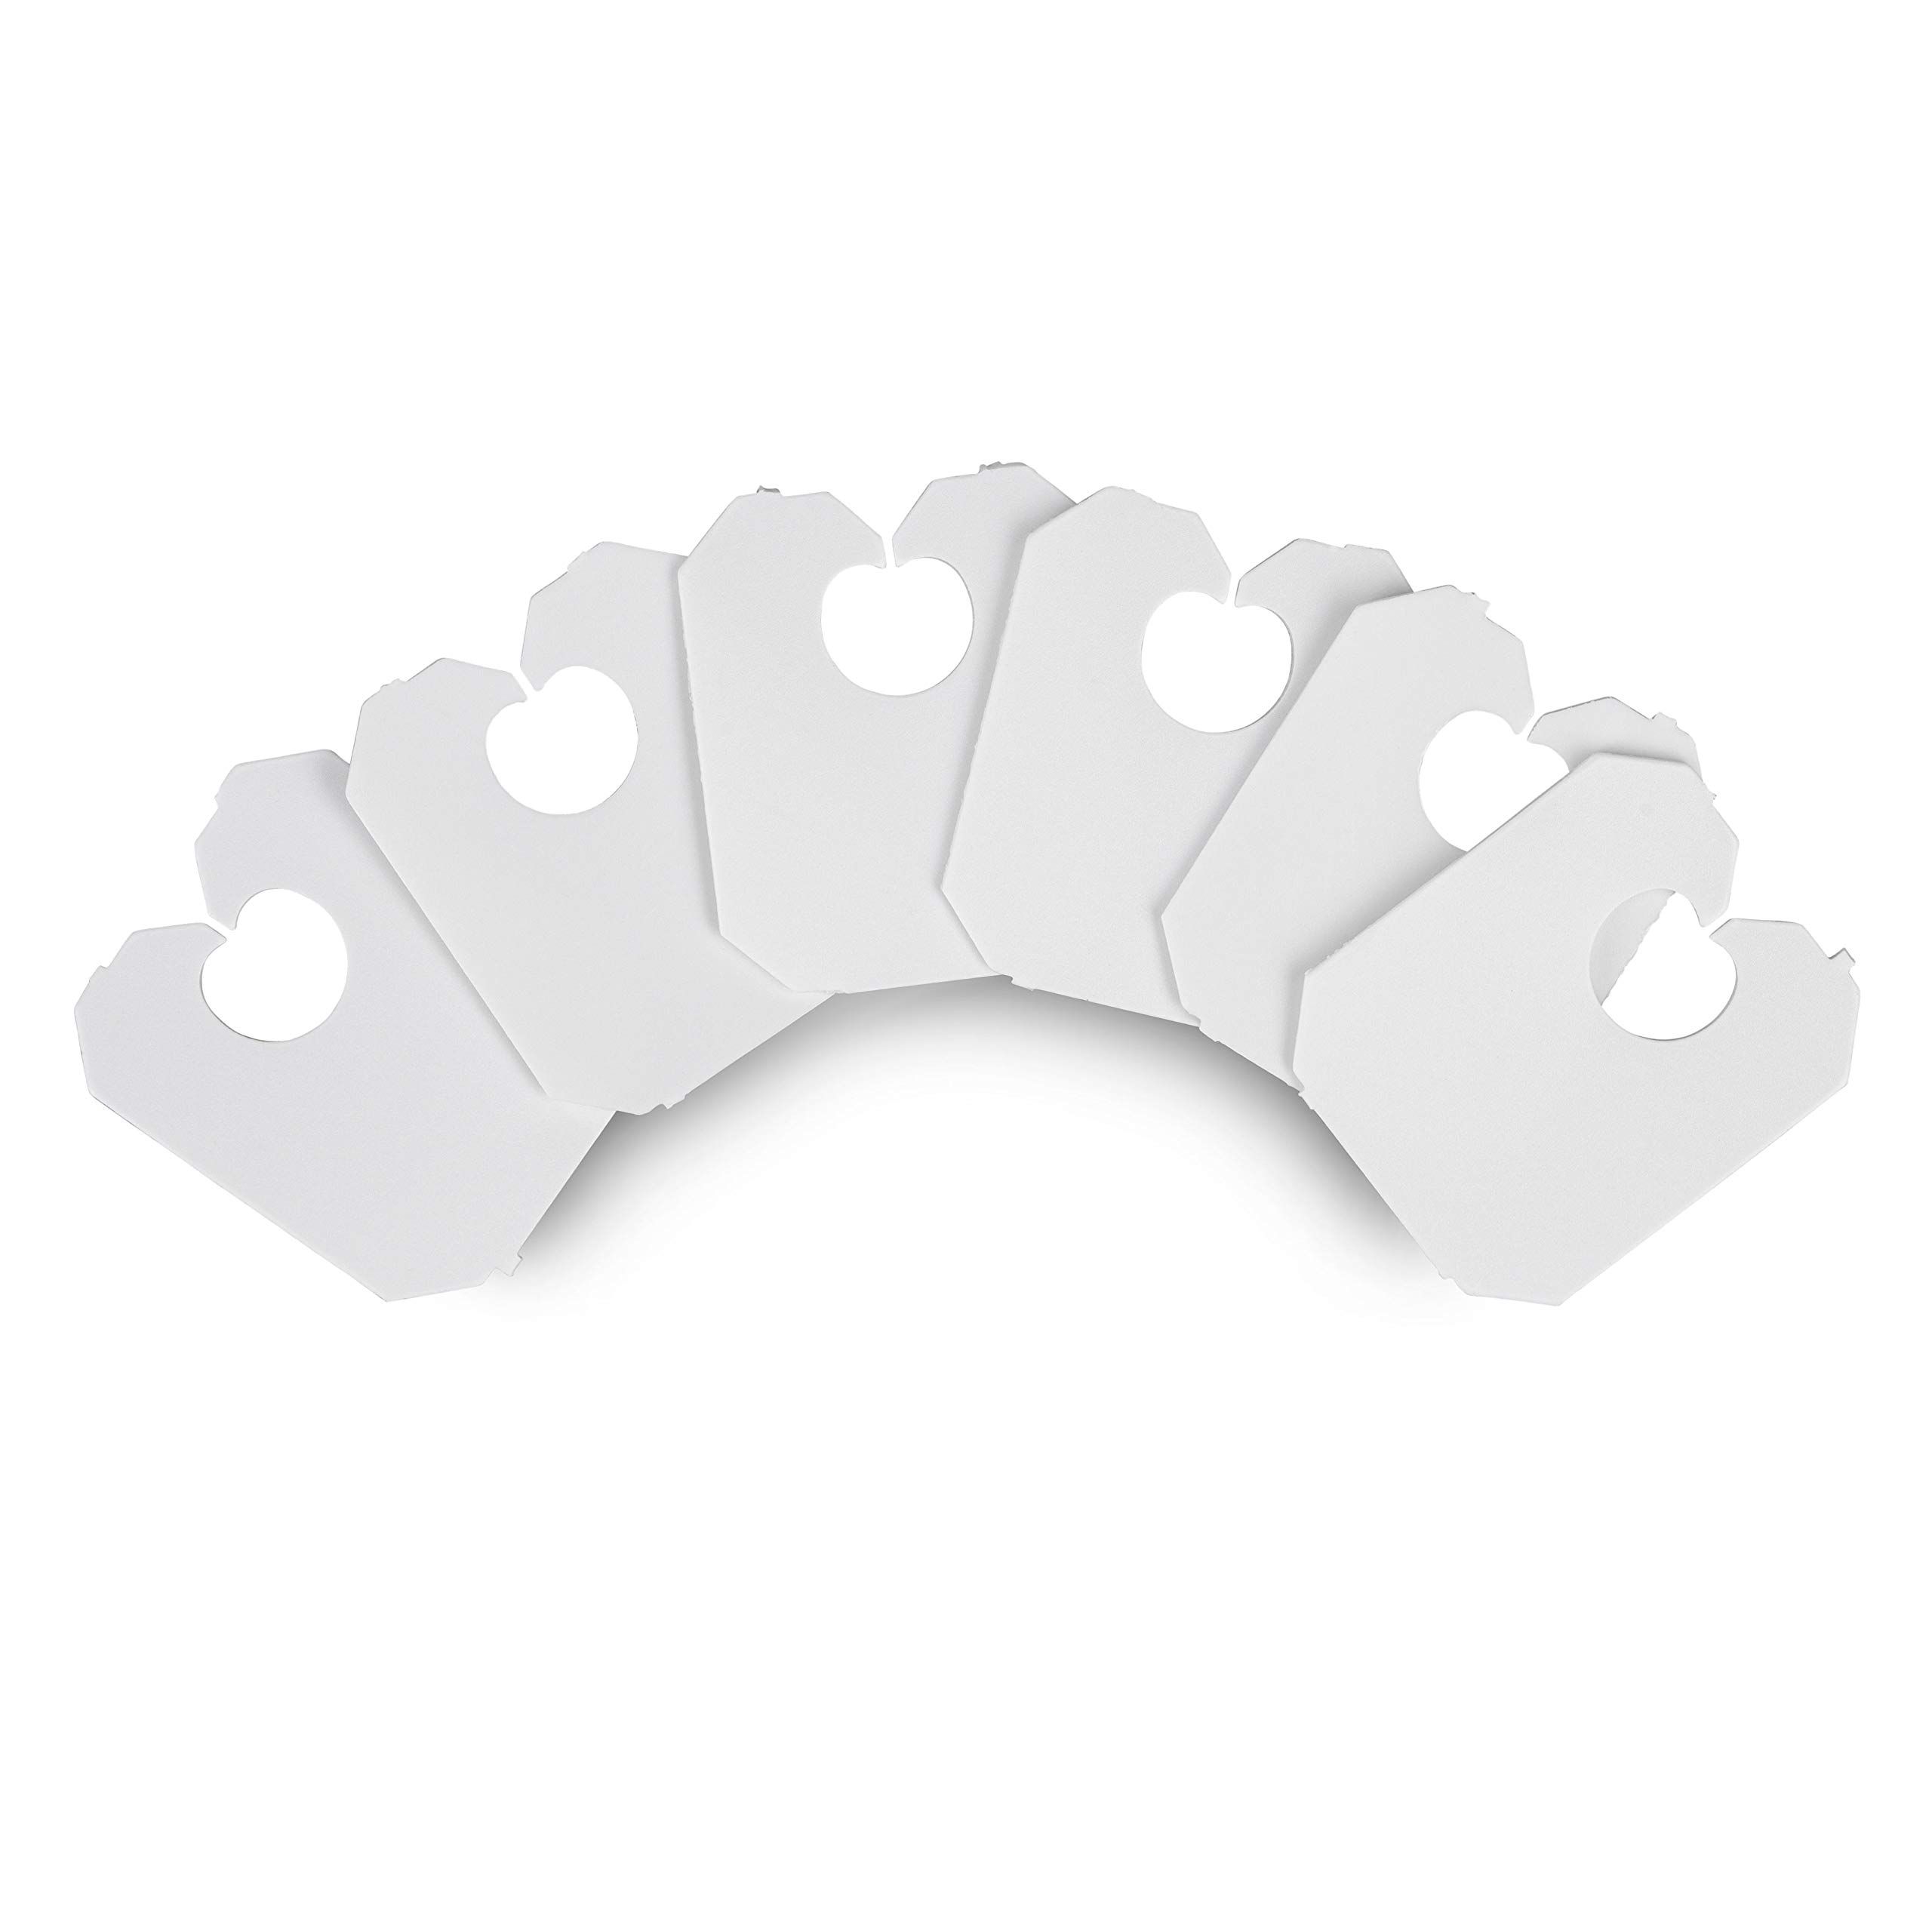 MT Products Red Plastic Chip and Bread Bag Clips - Pack of 100 - White